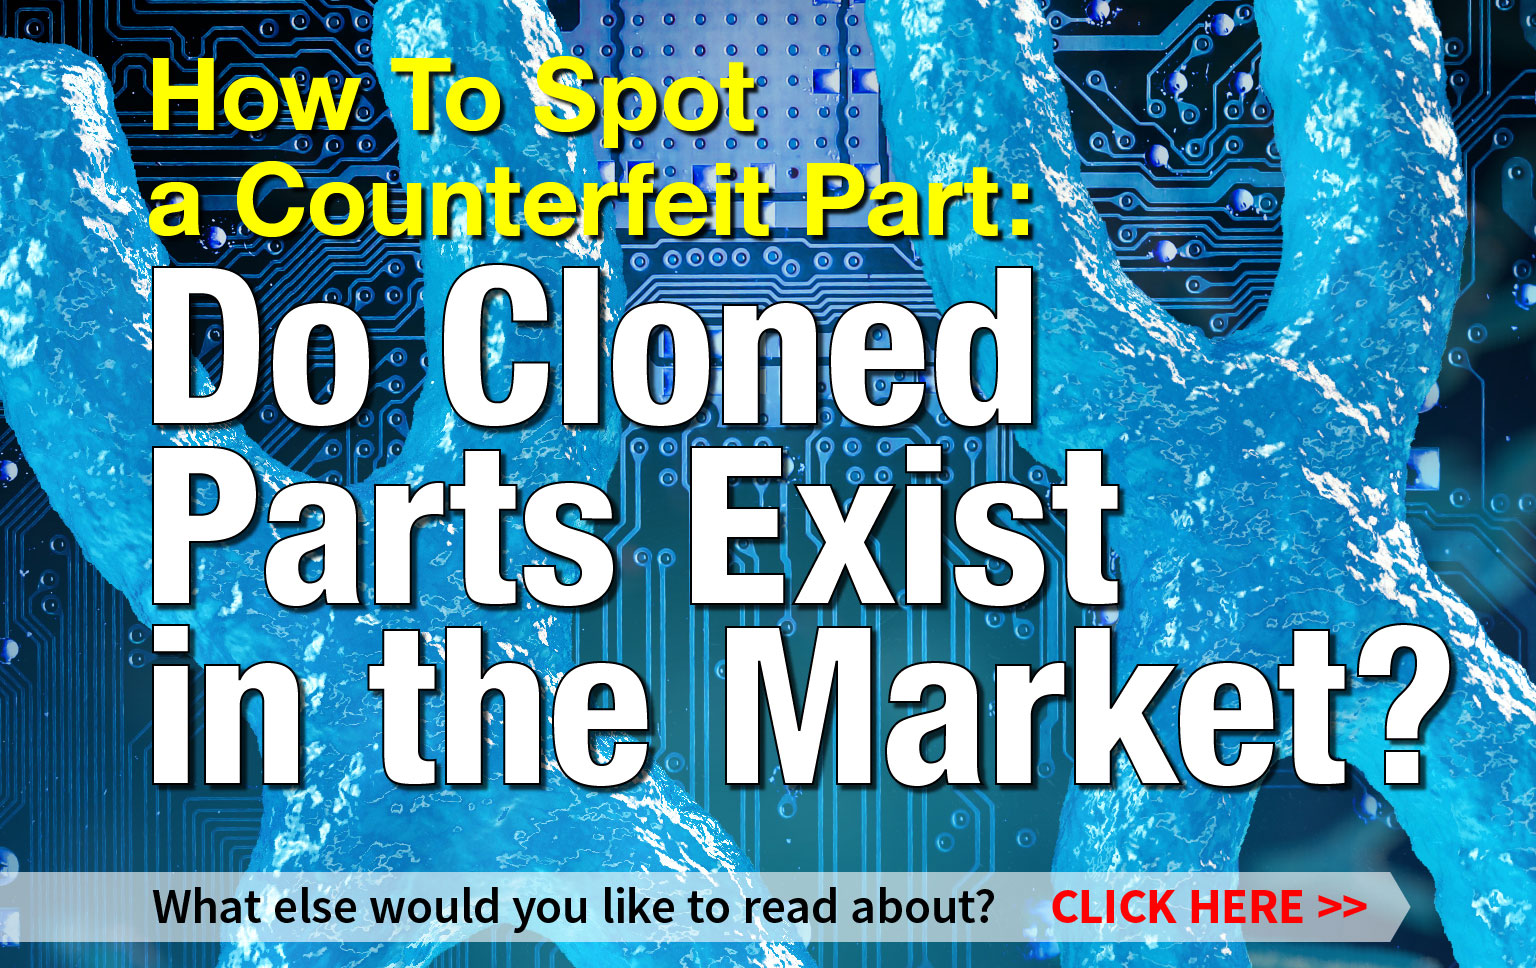 January 2018 Digital Issue - Do Cloned Parts Exist in the Market